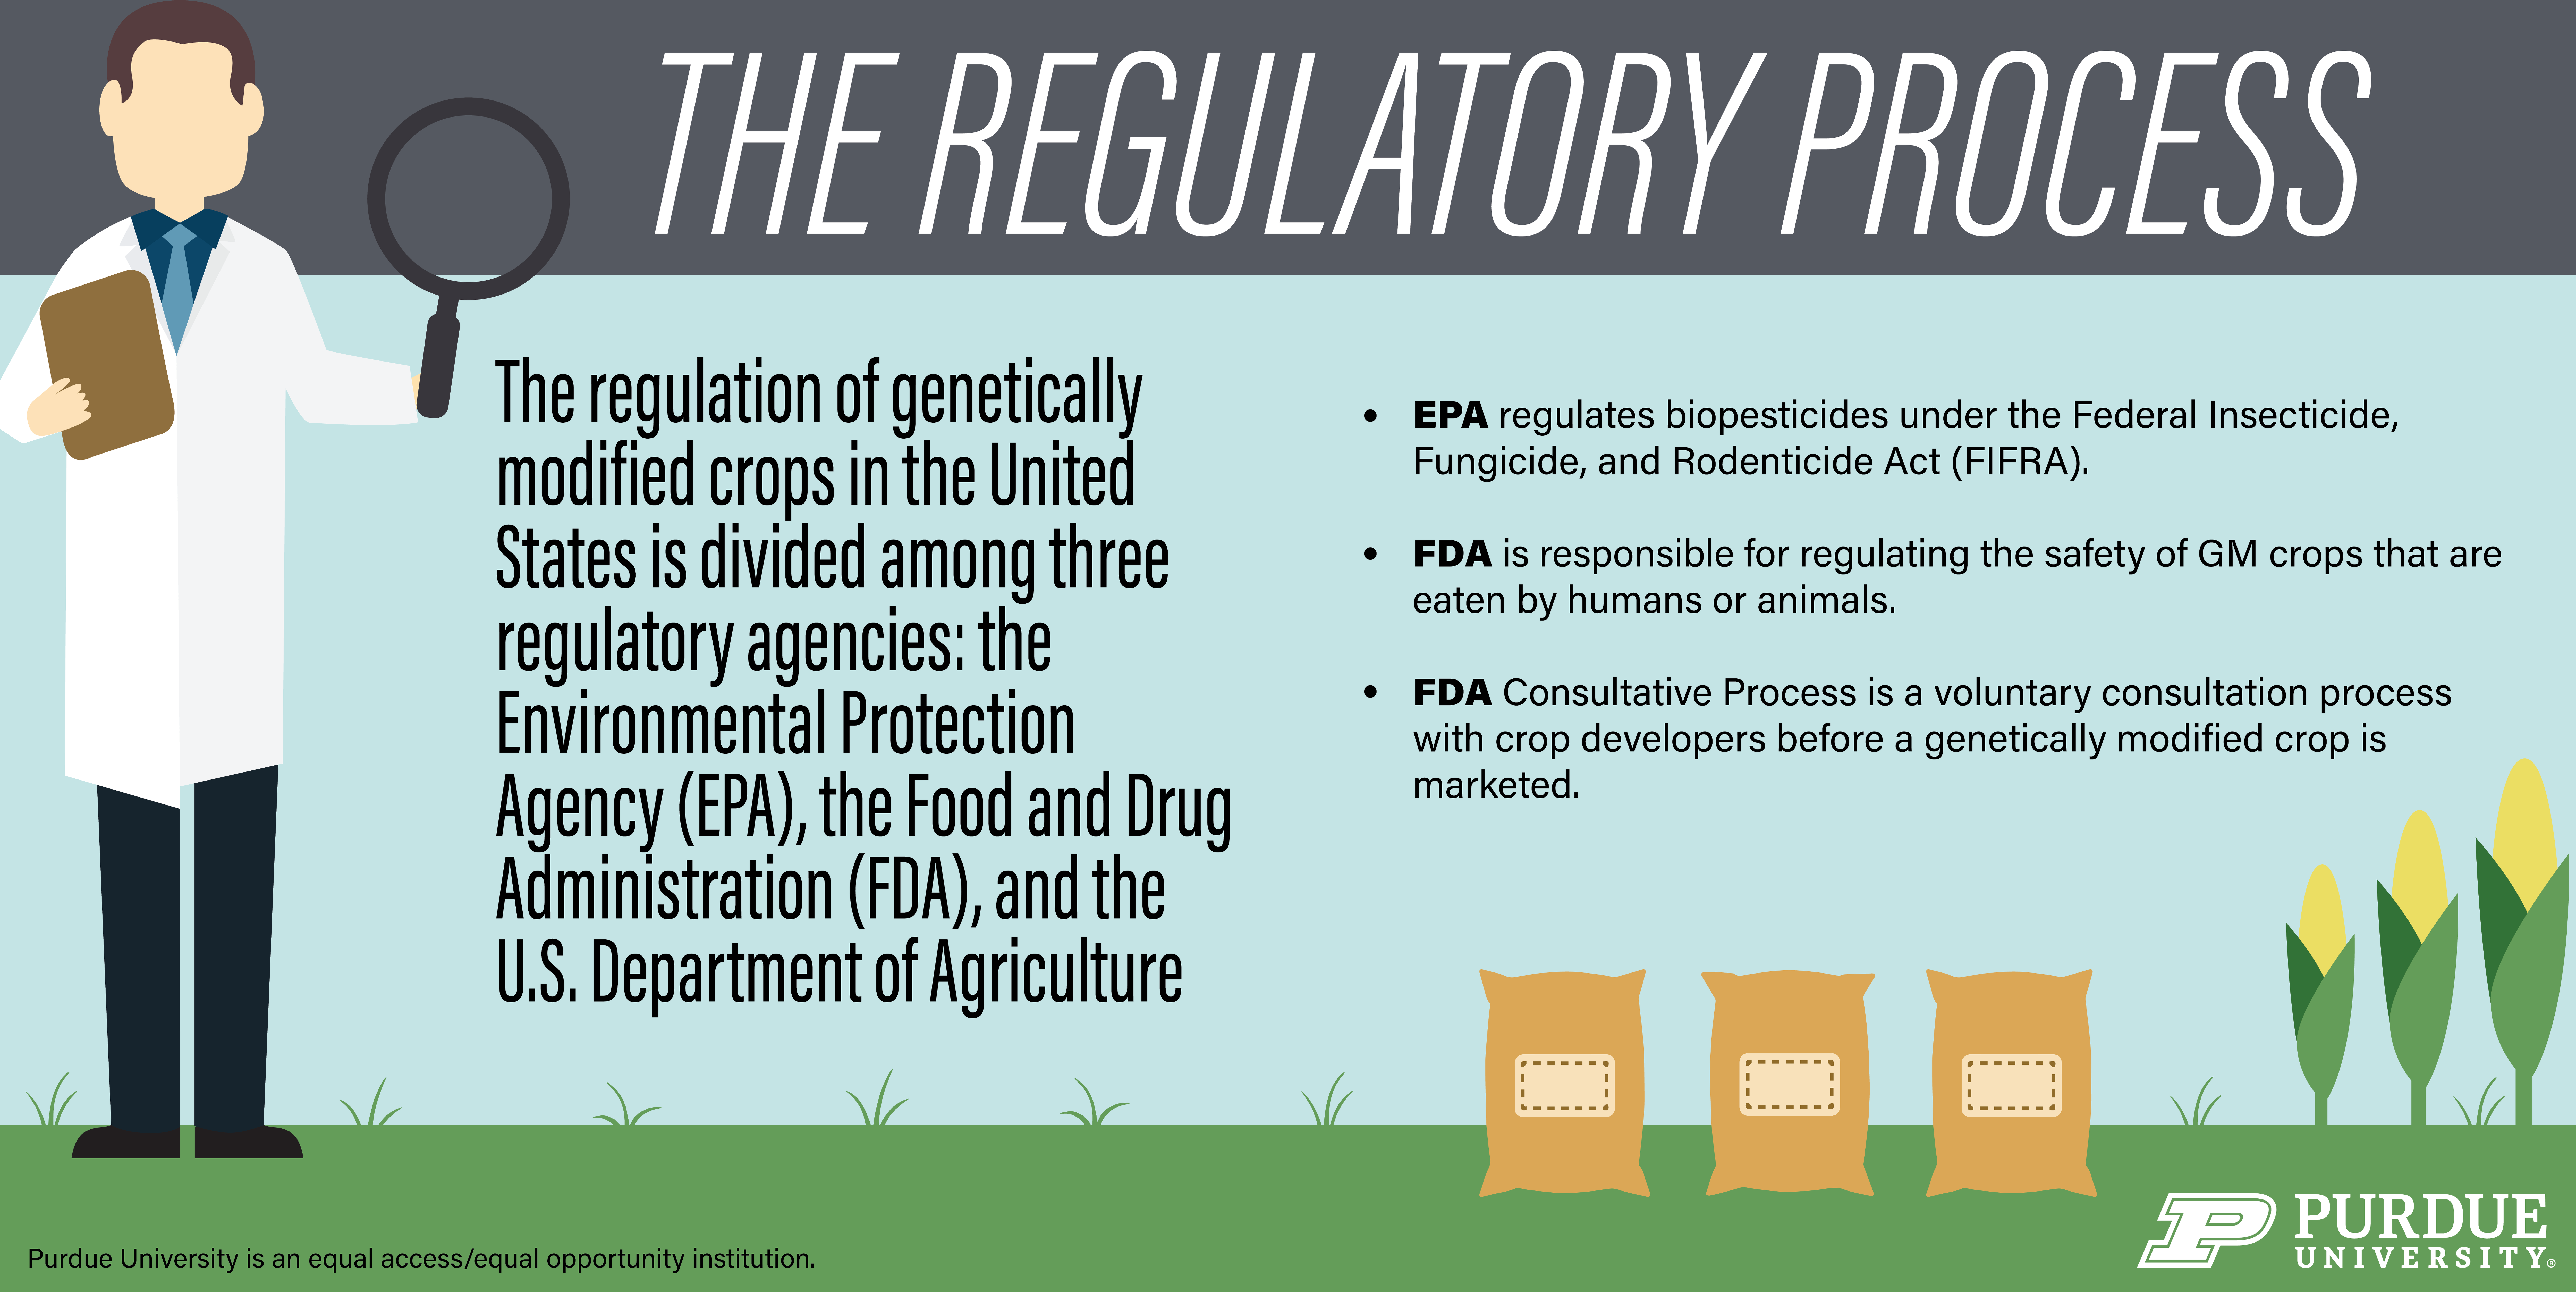 The regulation of genetically modified crops in the United States is divided among three regulatory agencies: the Environmental Protection Agency (EPA), the Food and Drug Administration (FDA), and the U.S. Department of Agriculture 